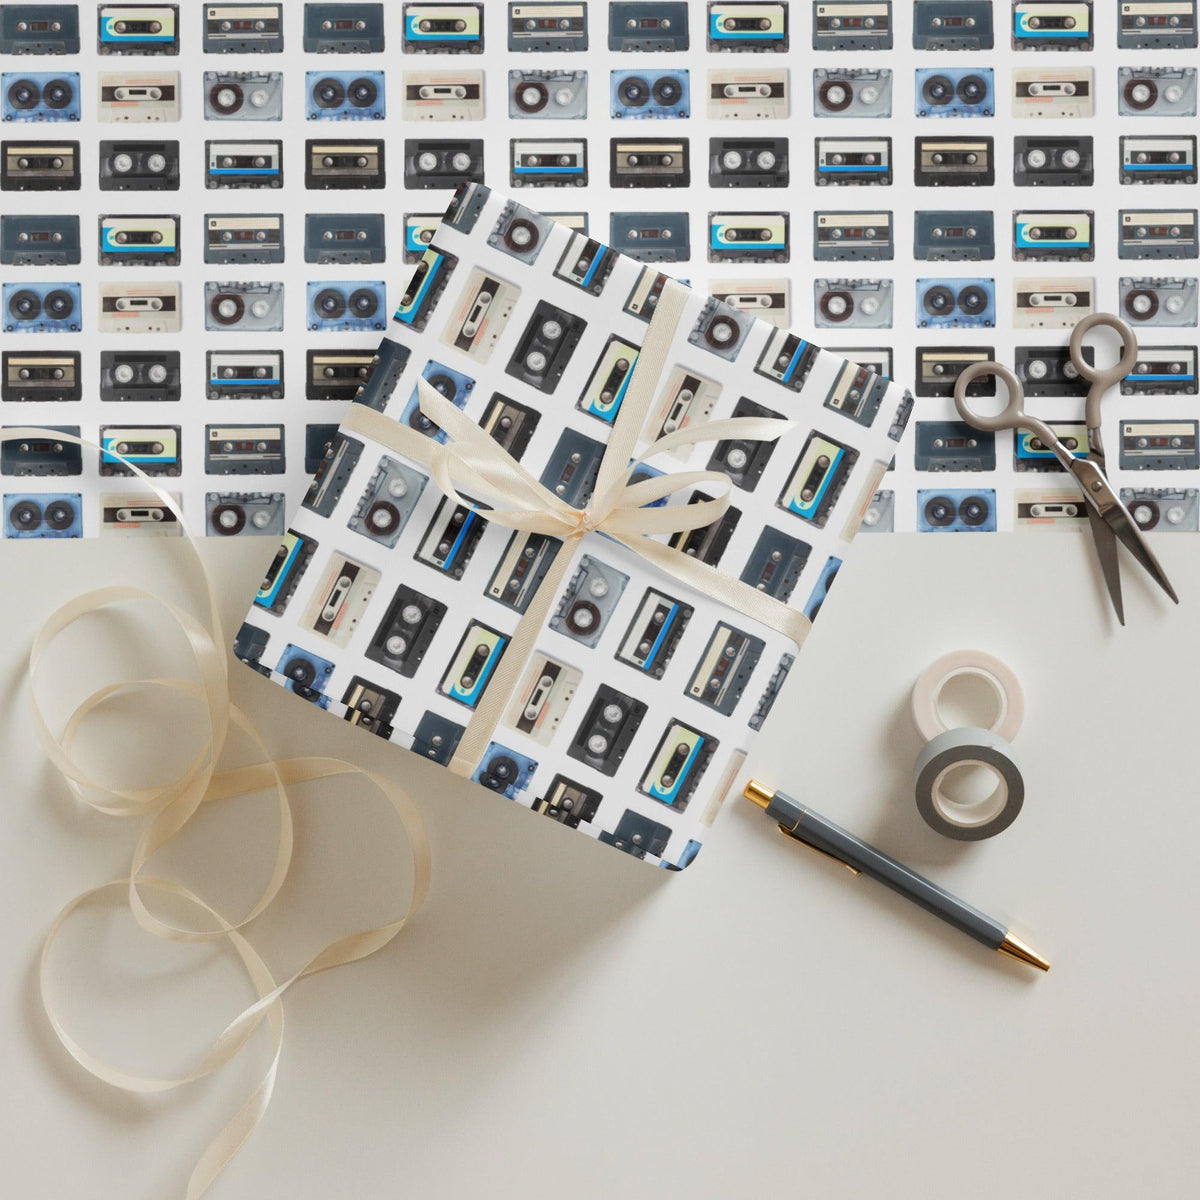 Vintage Cassette Tapes Wrapping Paper Sheets (3 rolls) - Tedeschi Studio, LLC.